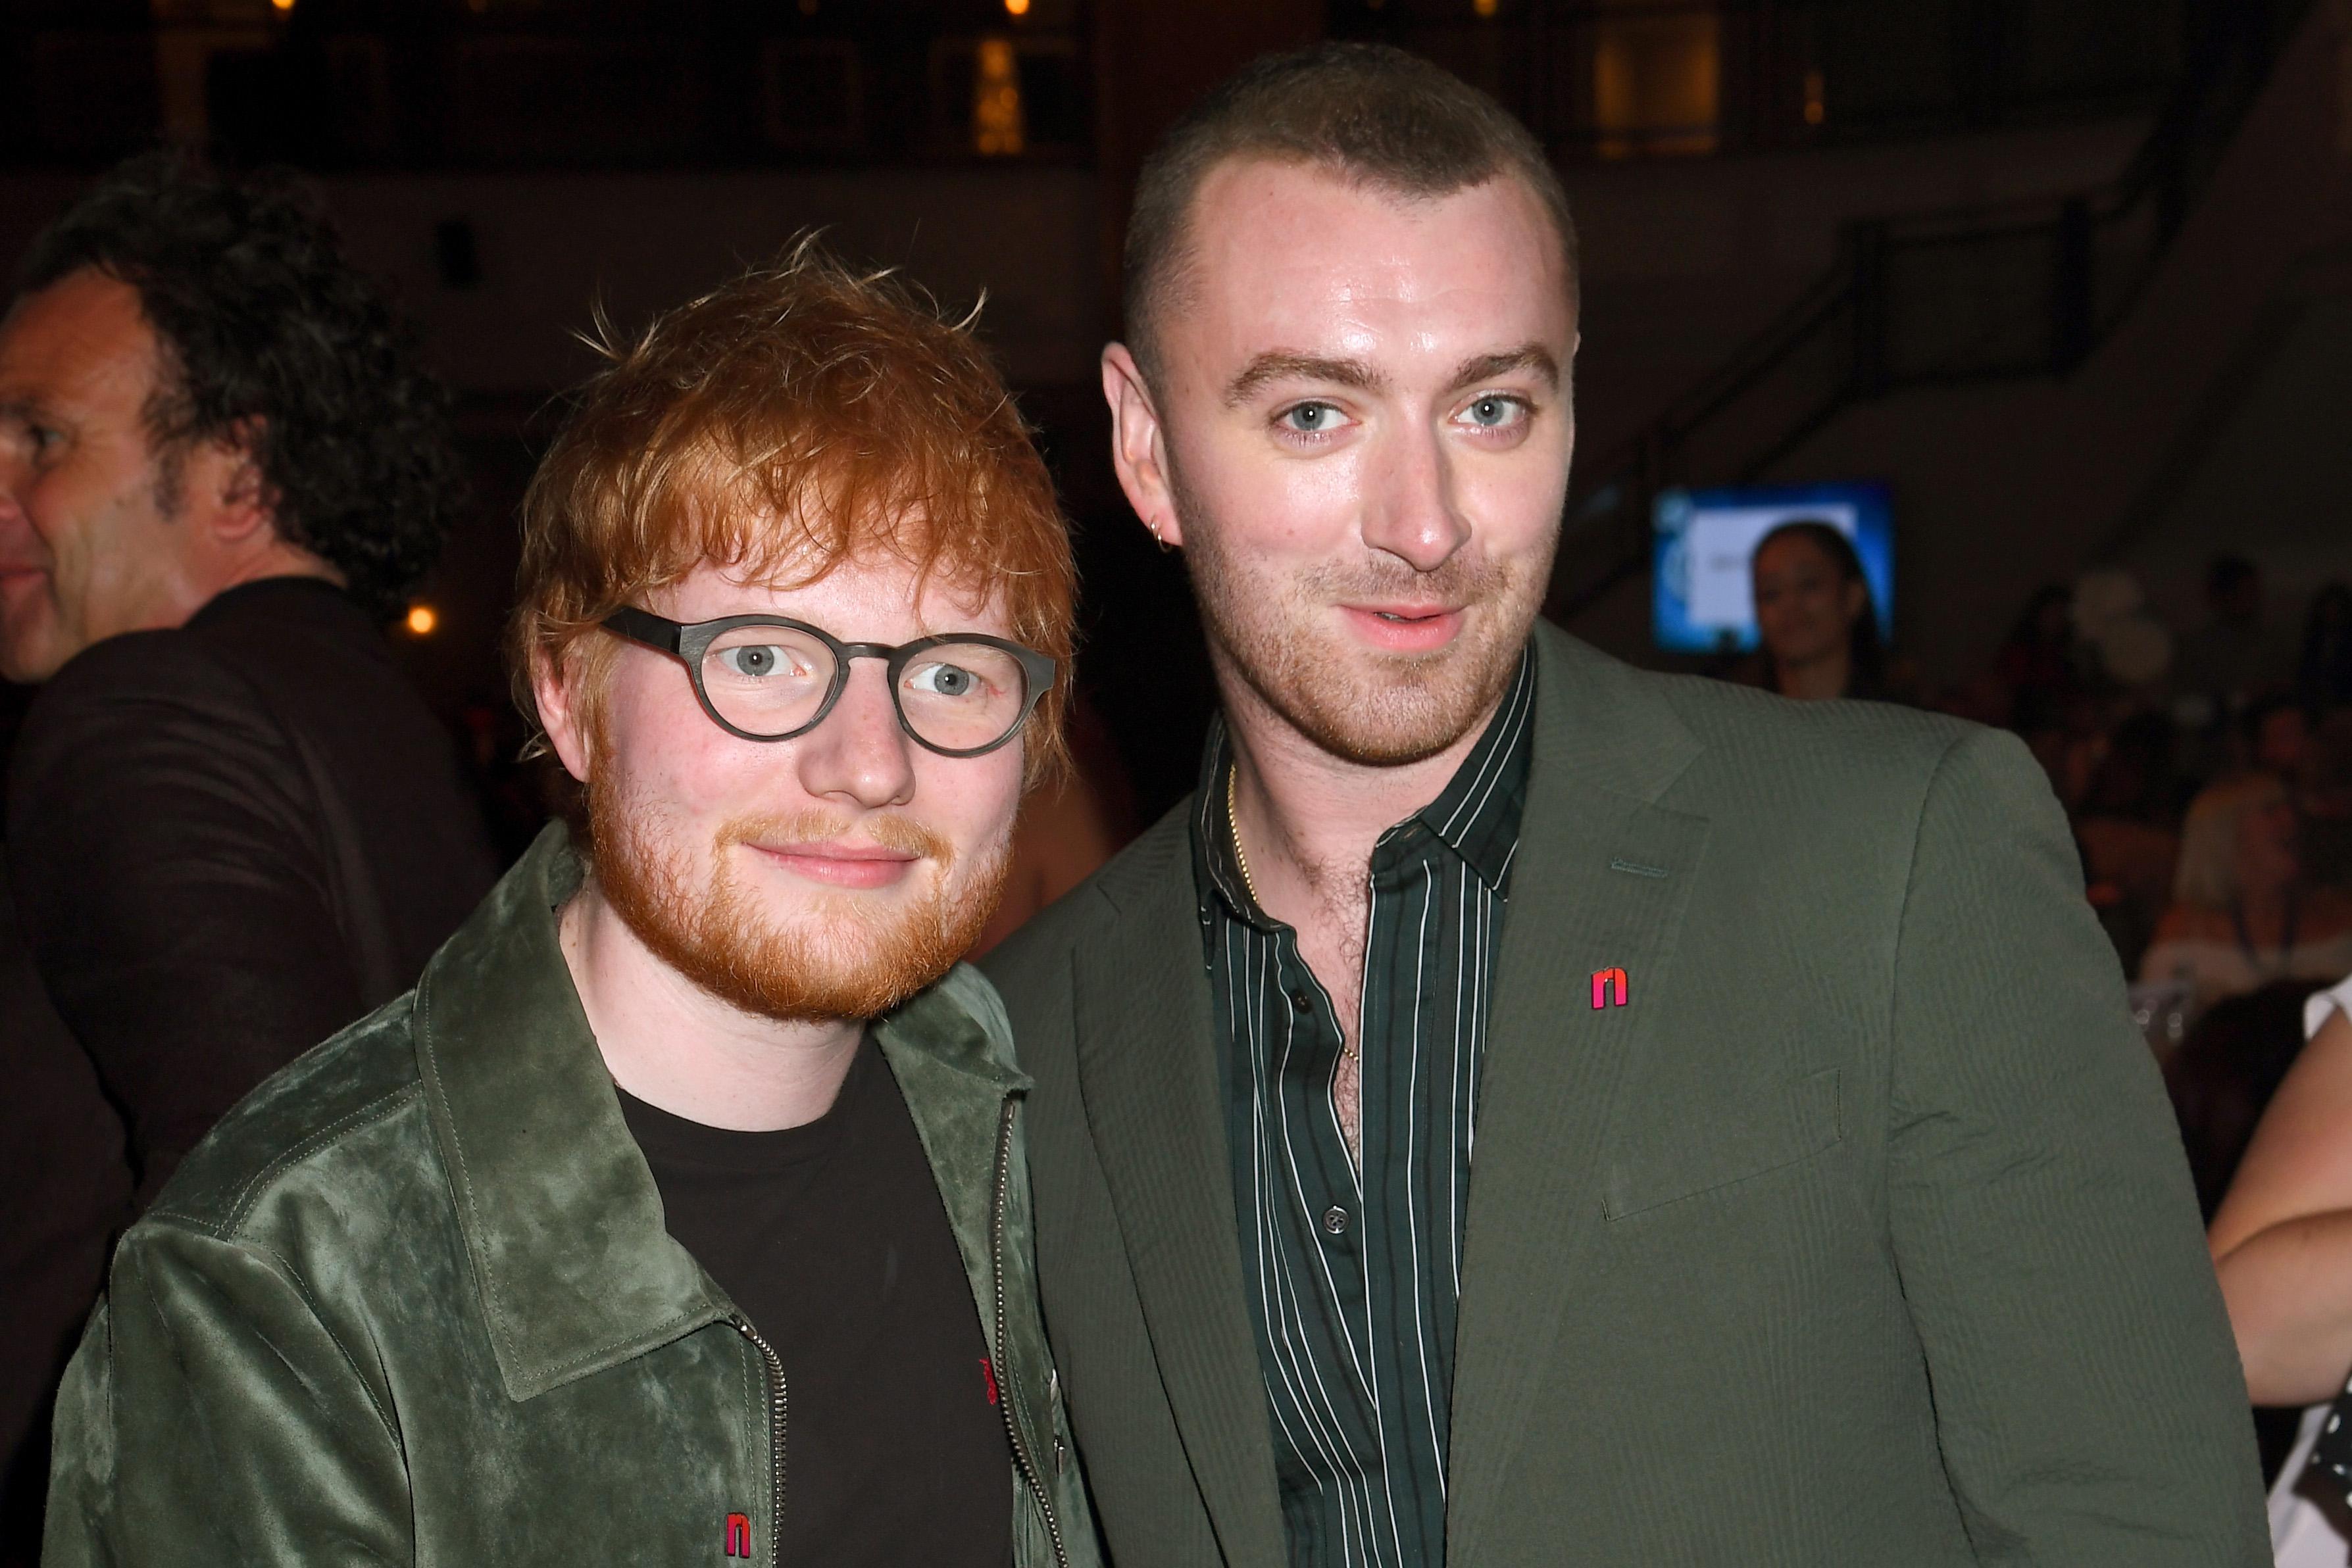 Sam Smith Gets Love from Celebs After They Request Gender-Neutral Pronouns